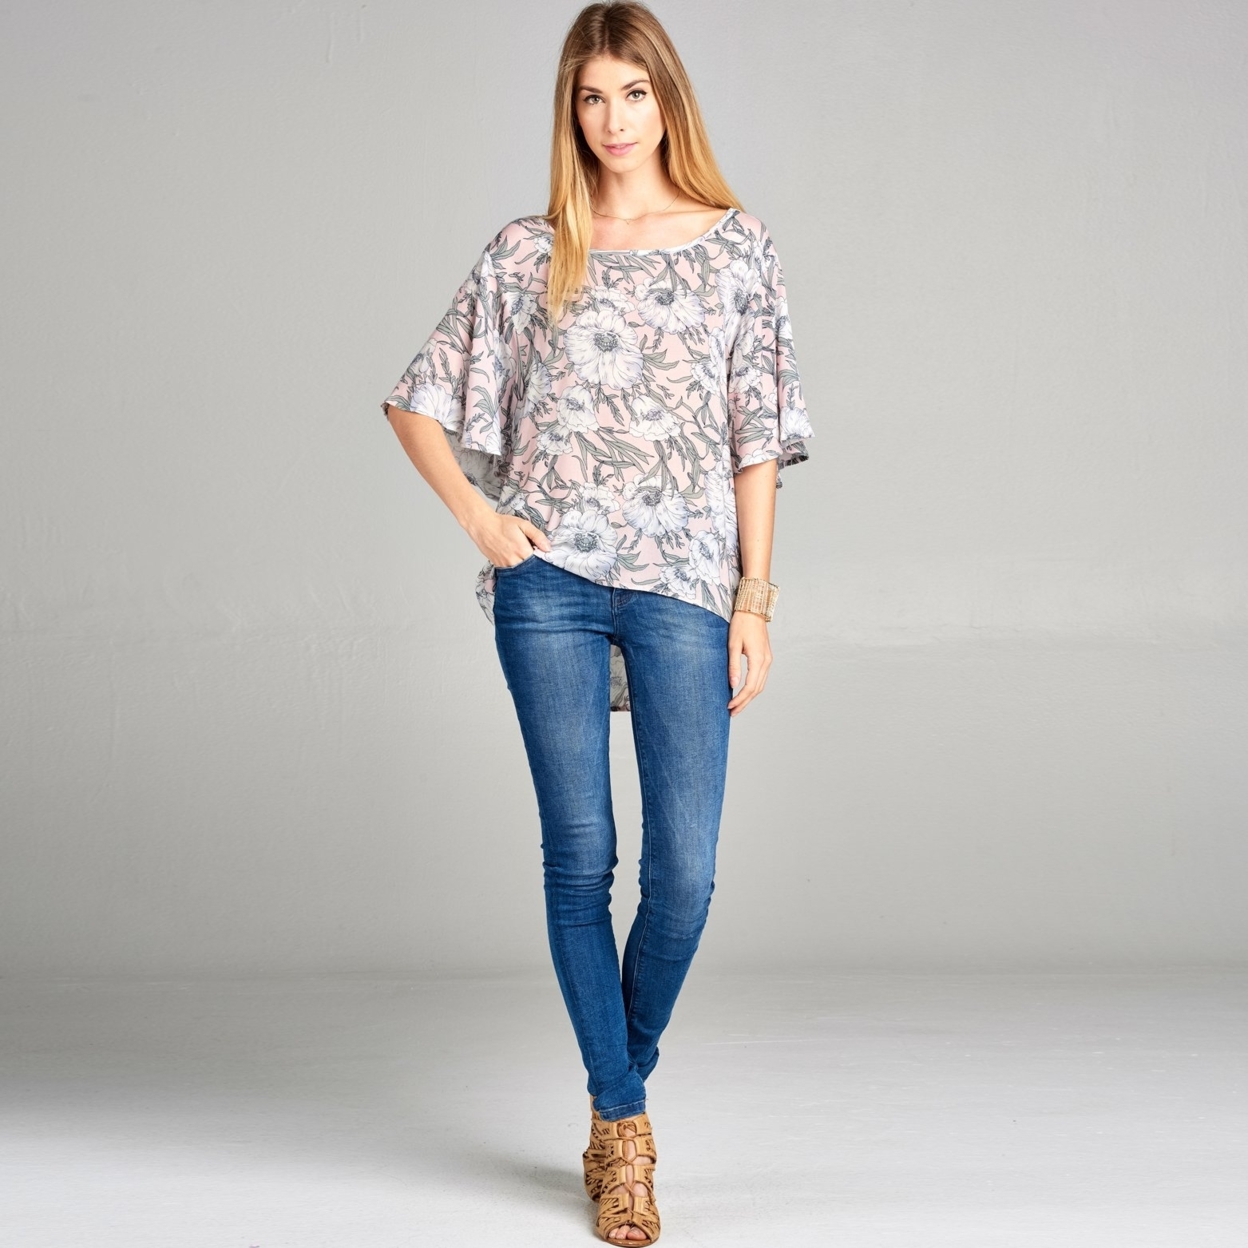 Butterfly Sleeve Floral Top - Dusty Pink, Small (2-6)